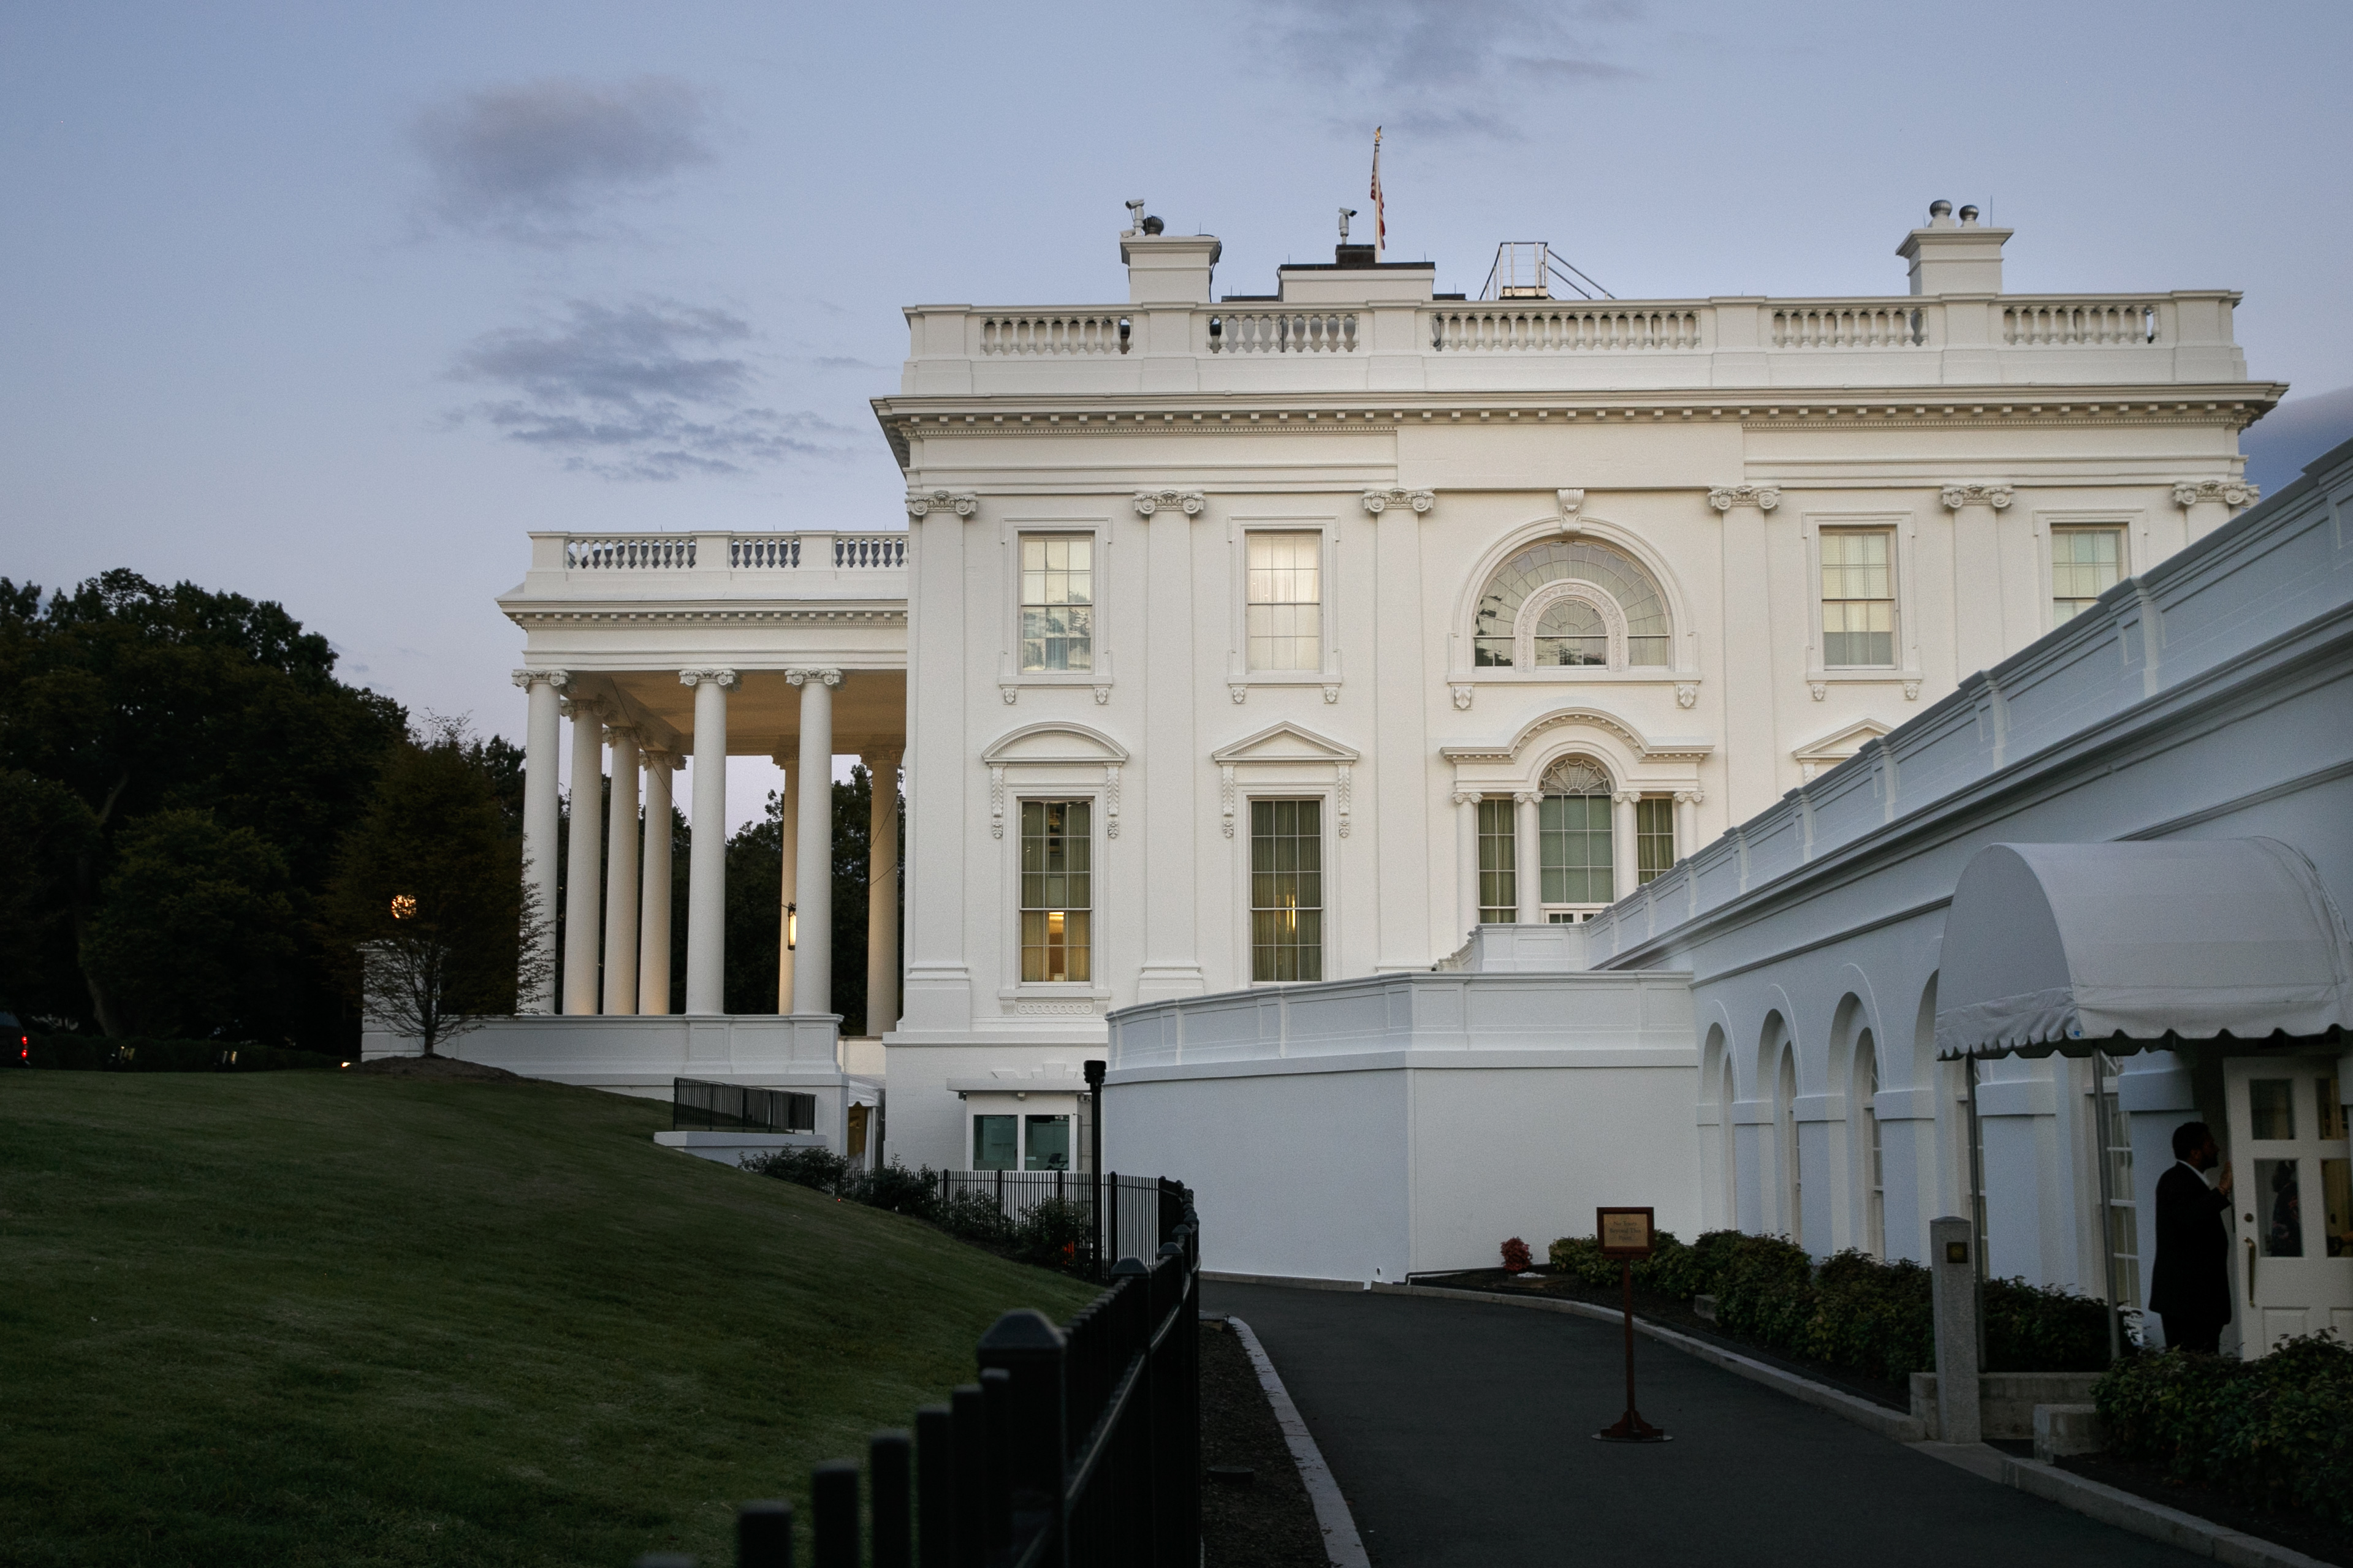 A man enters the press area of the White House at dusk, Saturday, Sept. 7, 2019, in Washington. On Saturday, Sept. 7, 2019, President Donald Trump tweeted he has called off a secret Camp David meeting with Taliban and Afghanistan leaders. (AP Photo/Jacquelyn Martin)